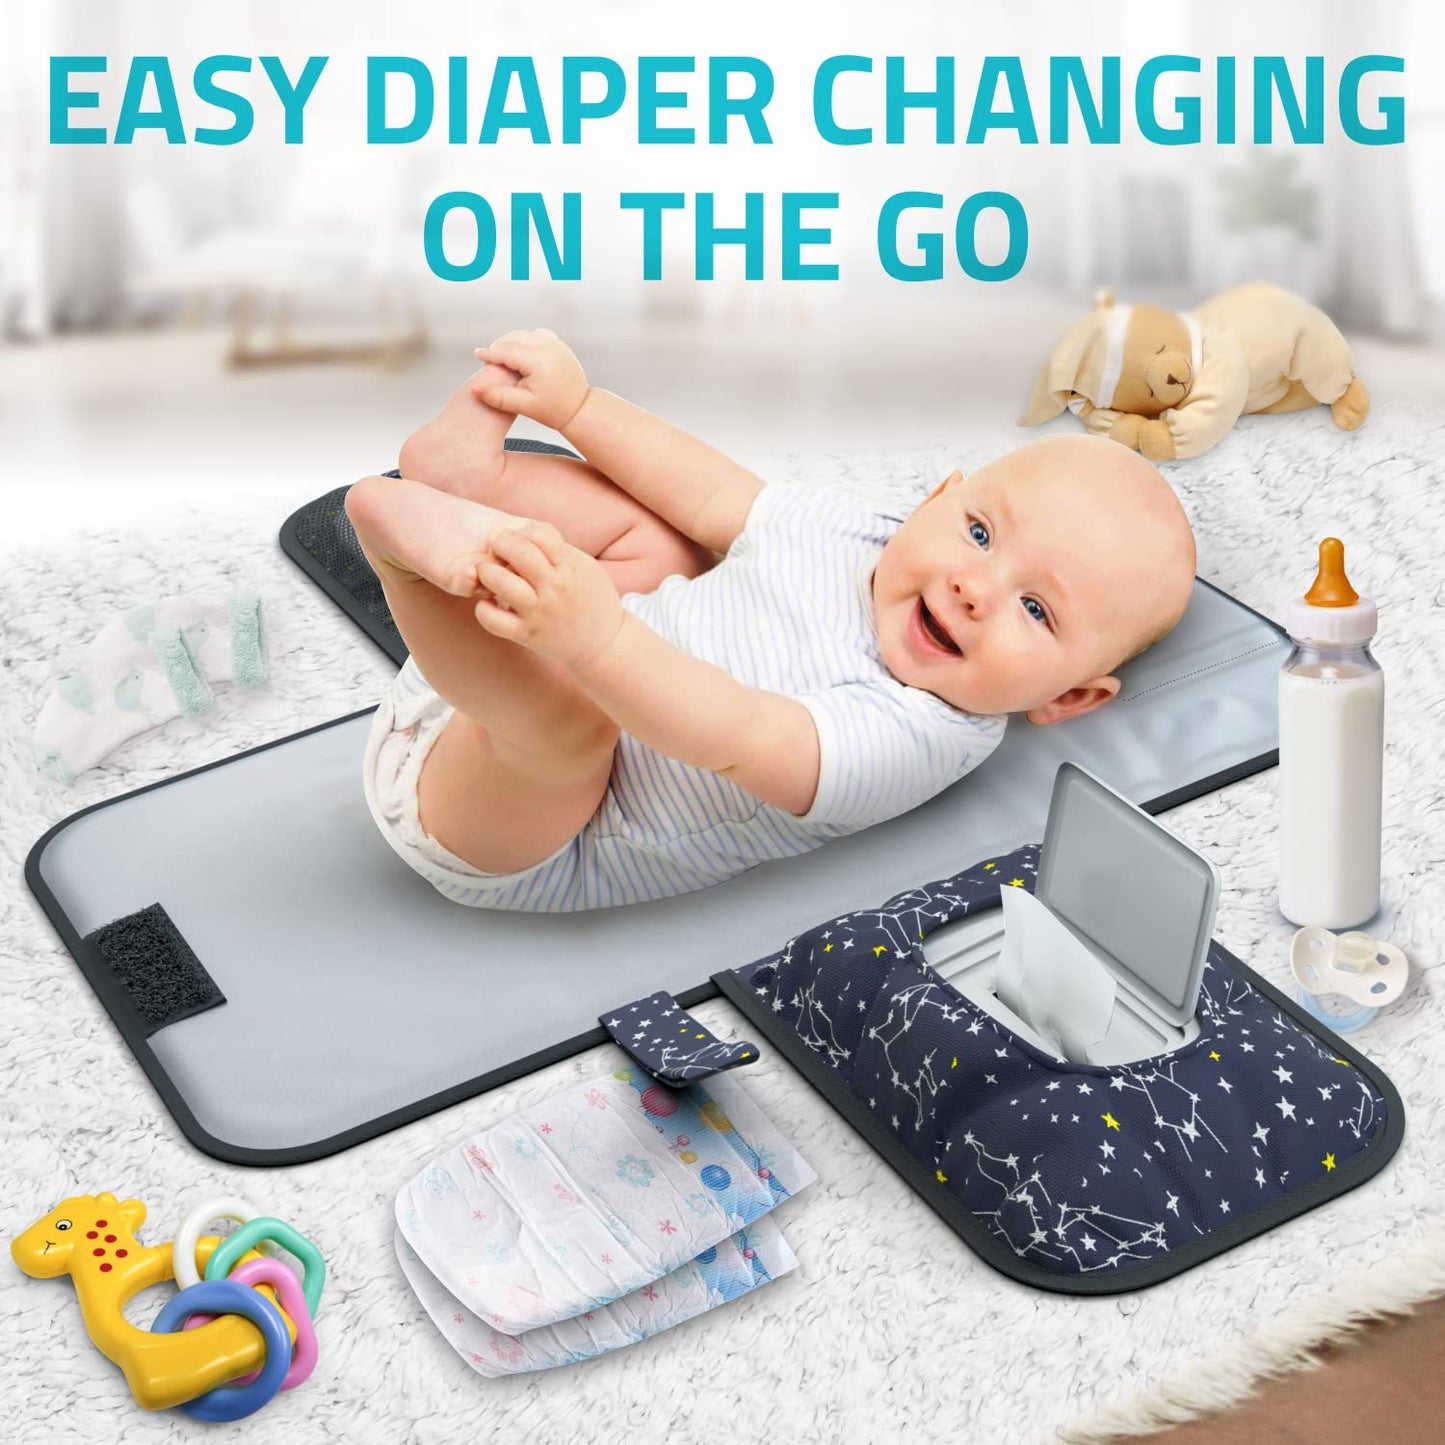 Premium Portable Diaper Changing Pad - Soft, Lightweight, and Waterproof